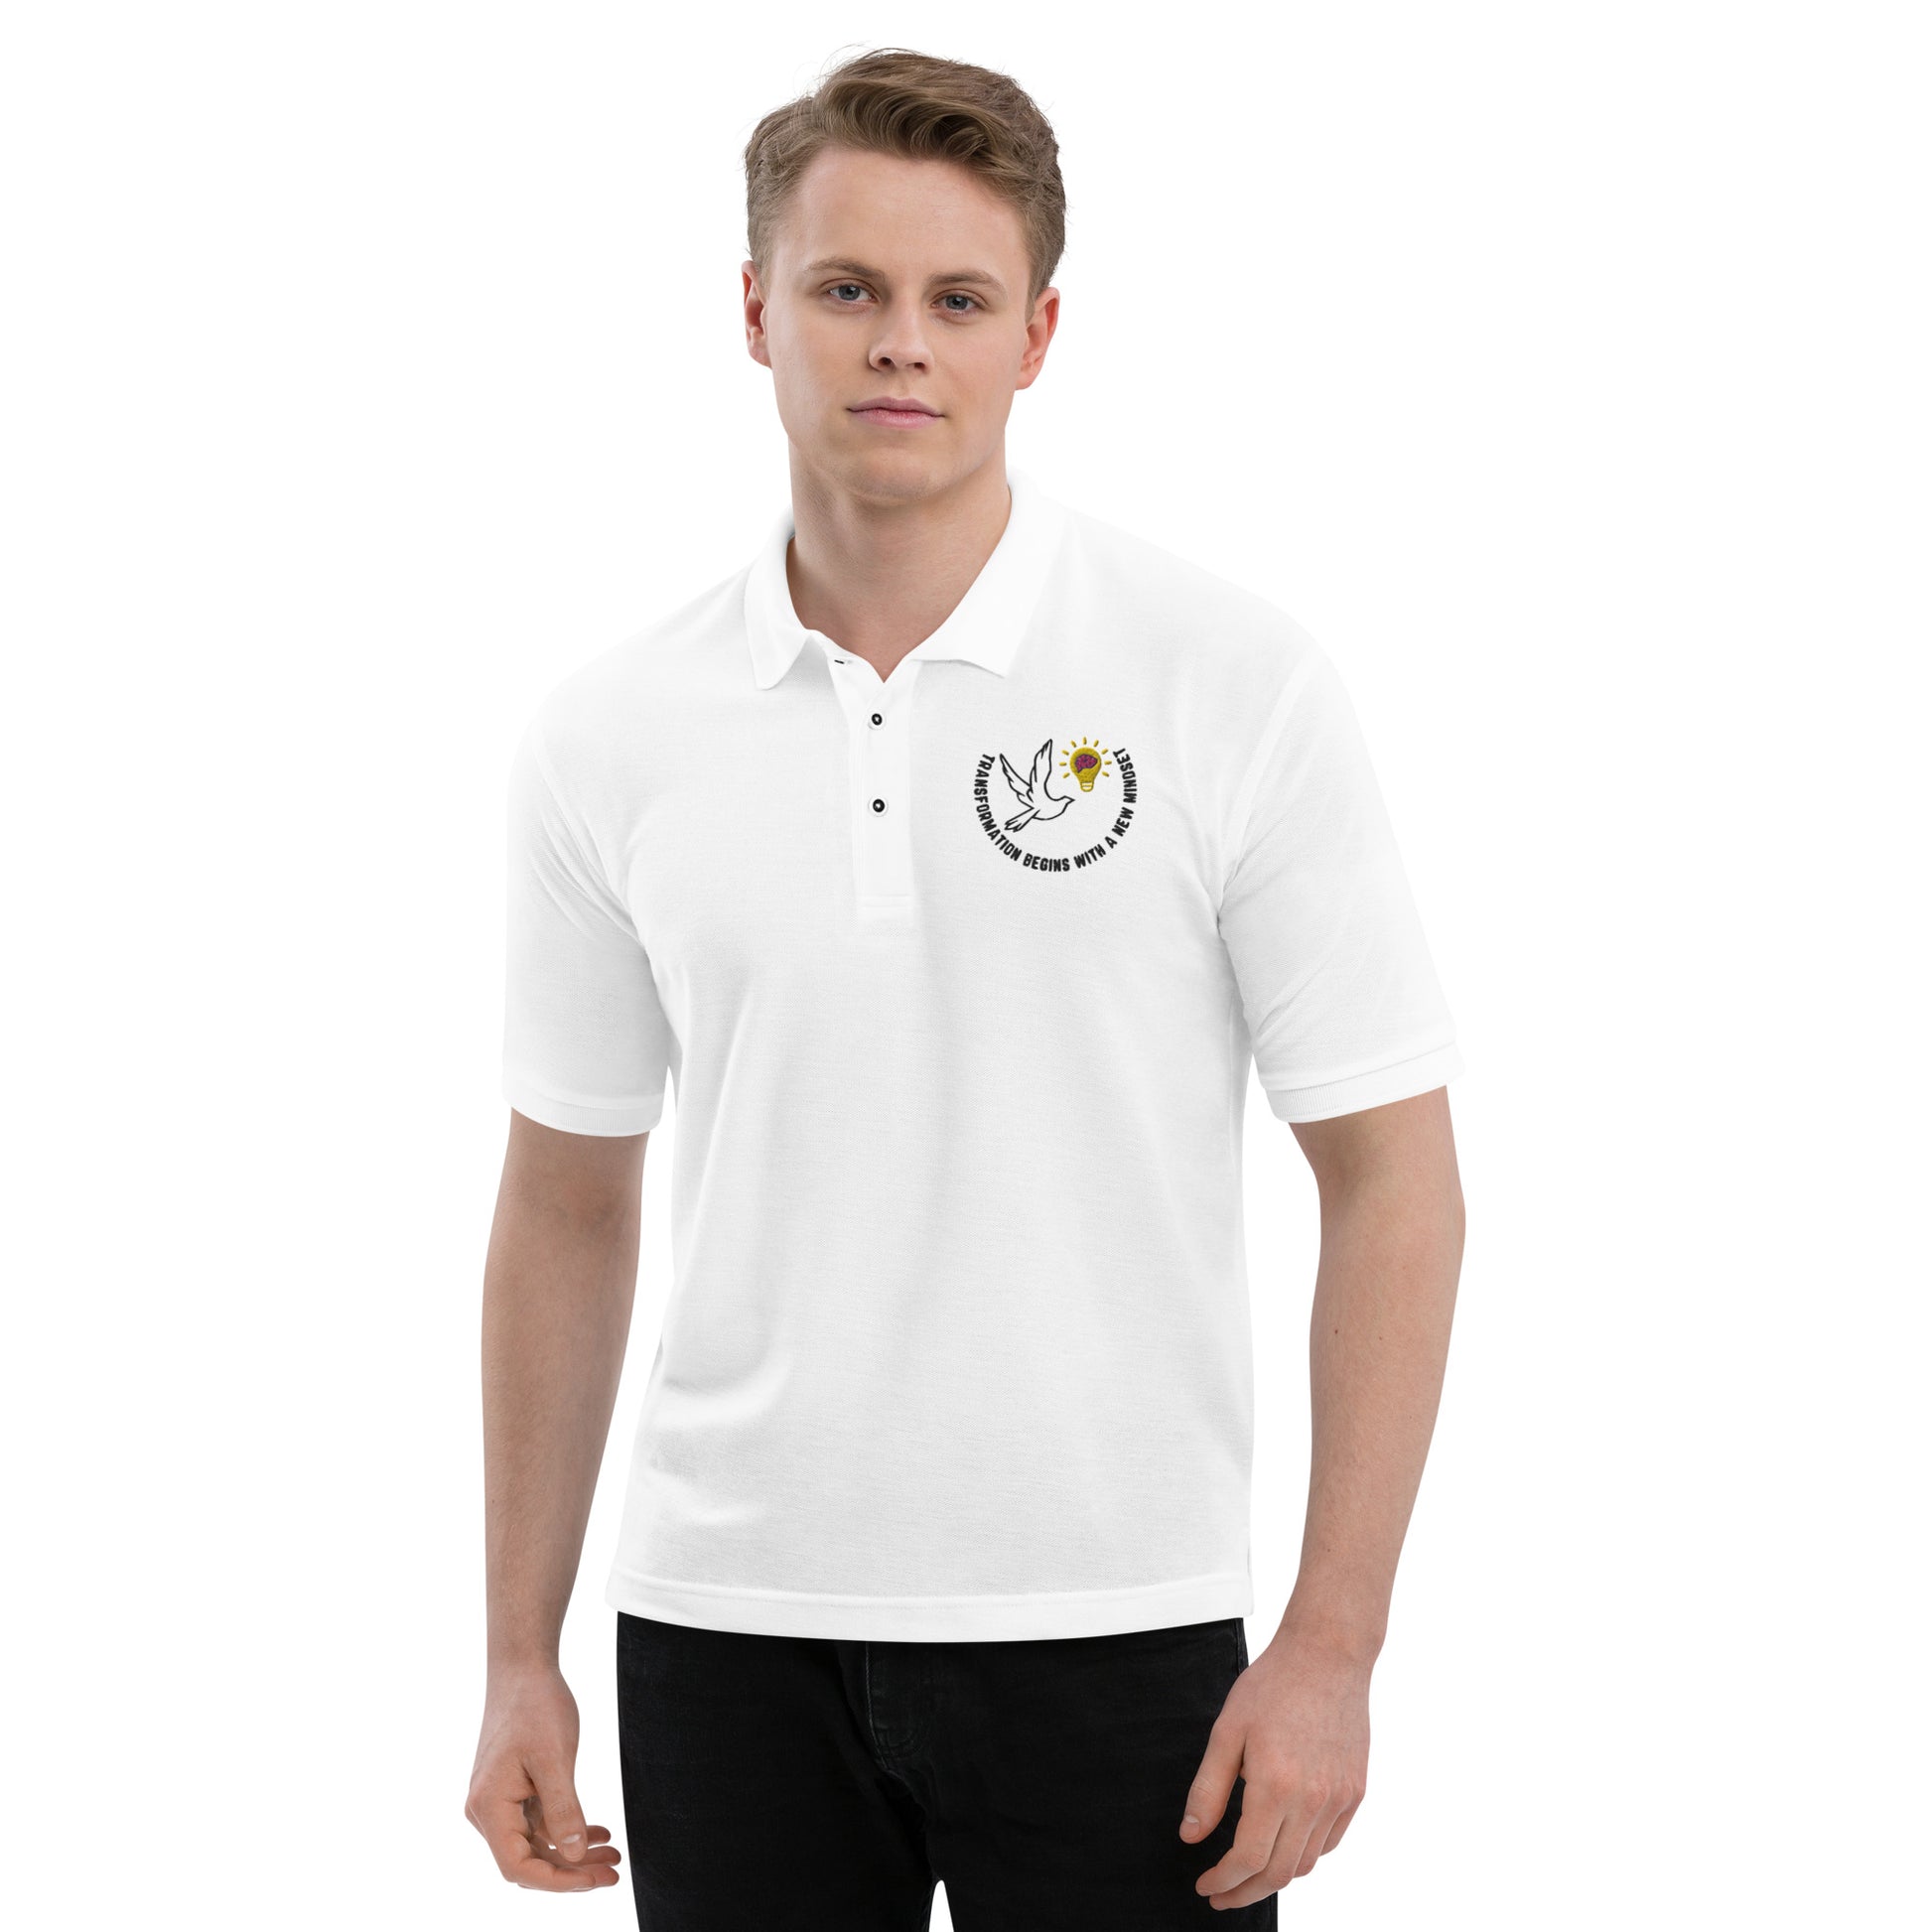 Premium Polo | Better Outcomes | Slogan | Transformation Begins with a New Mindset | White and Stone - Better Outcomes